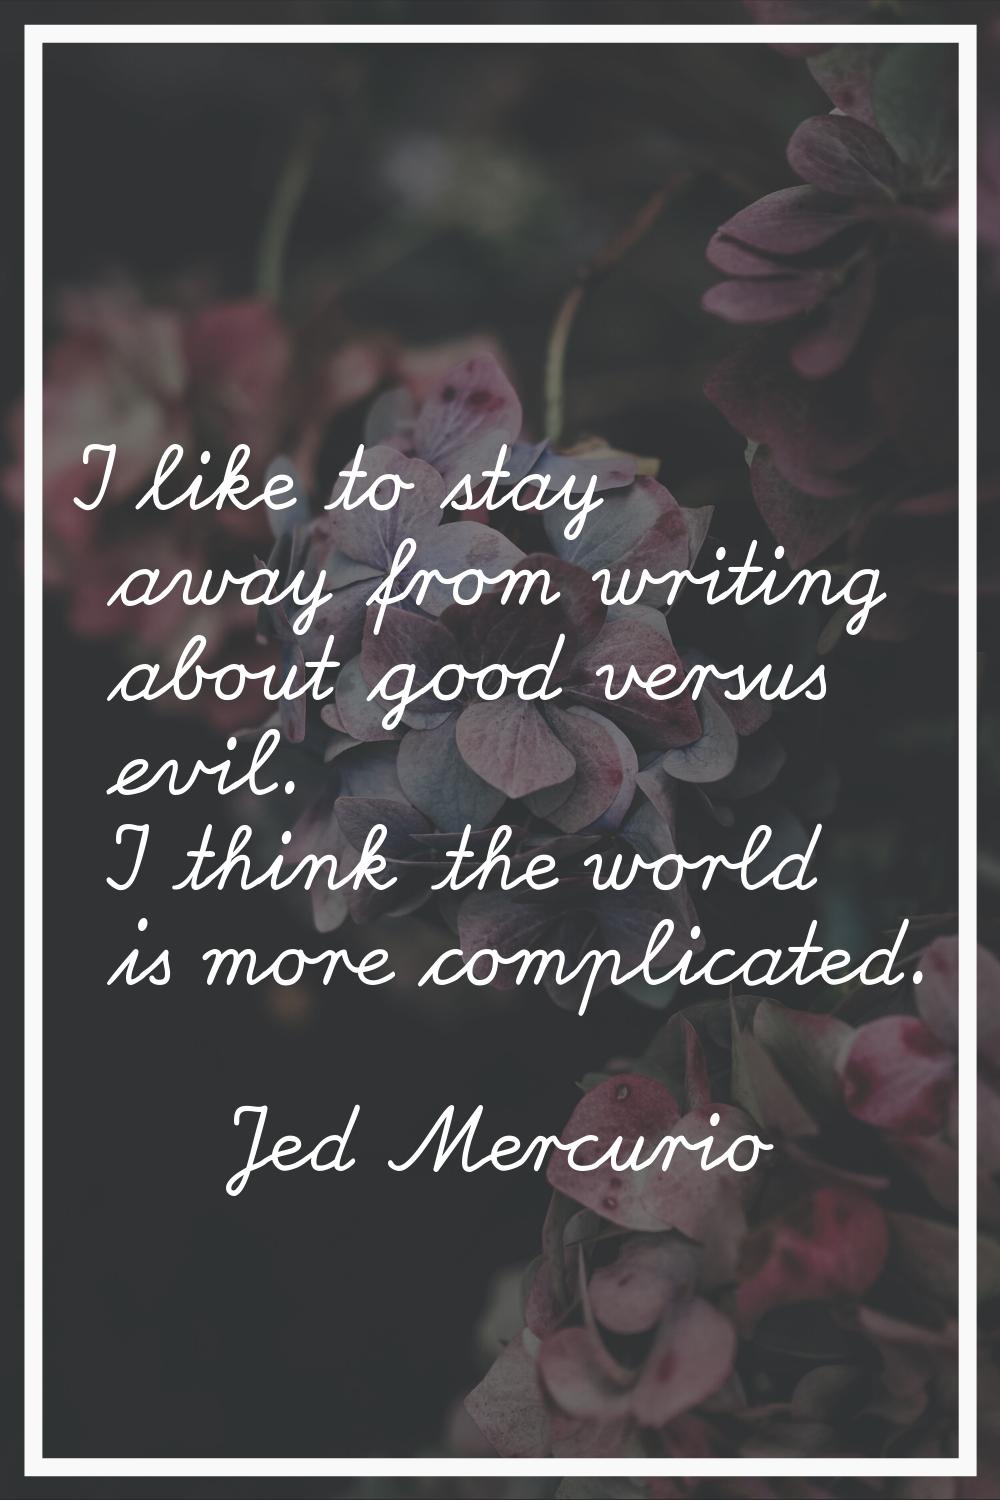 I like to stay away from writing about good versus evil. I think the world is more complicated.